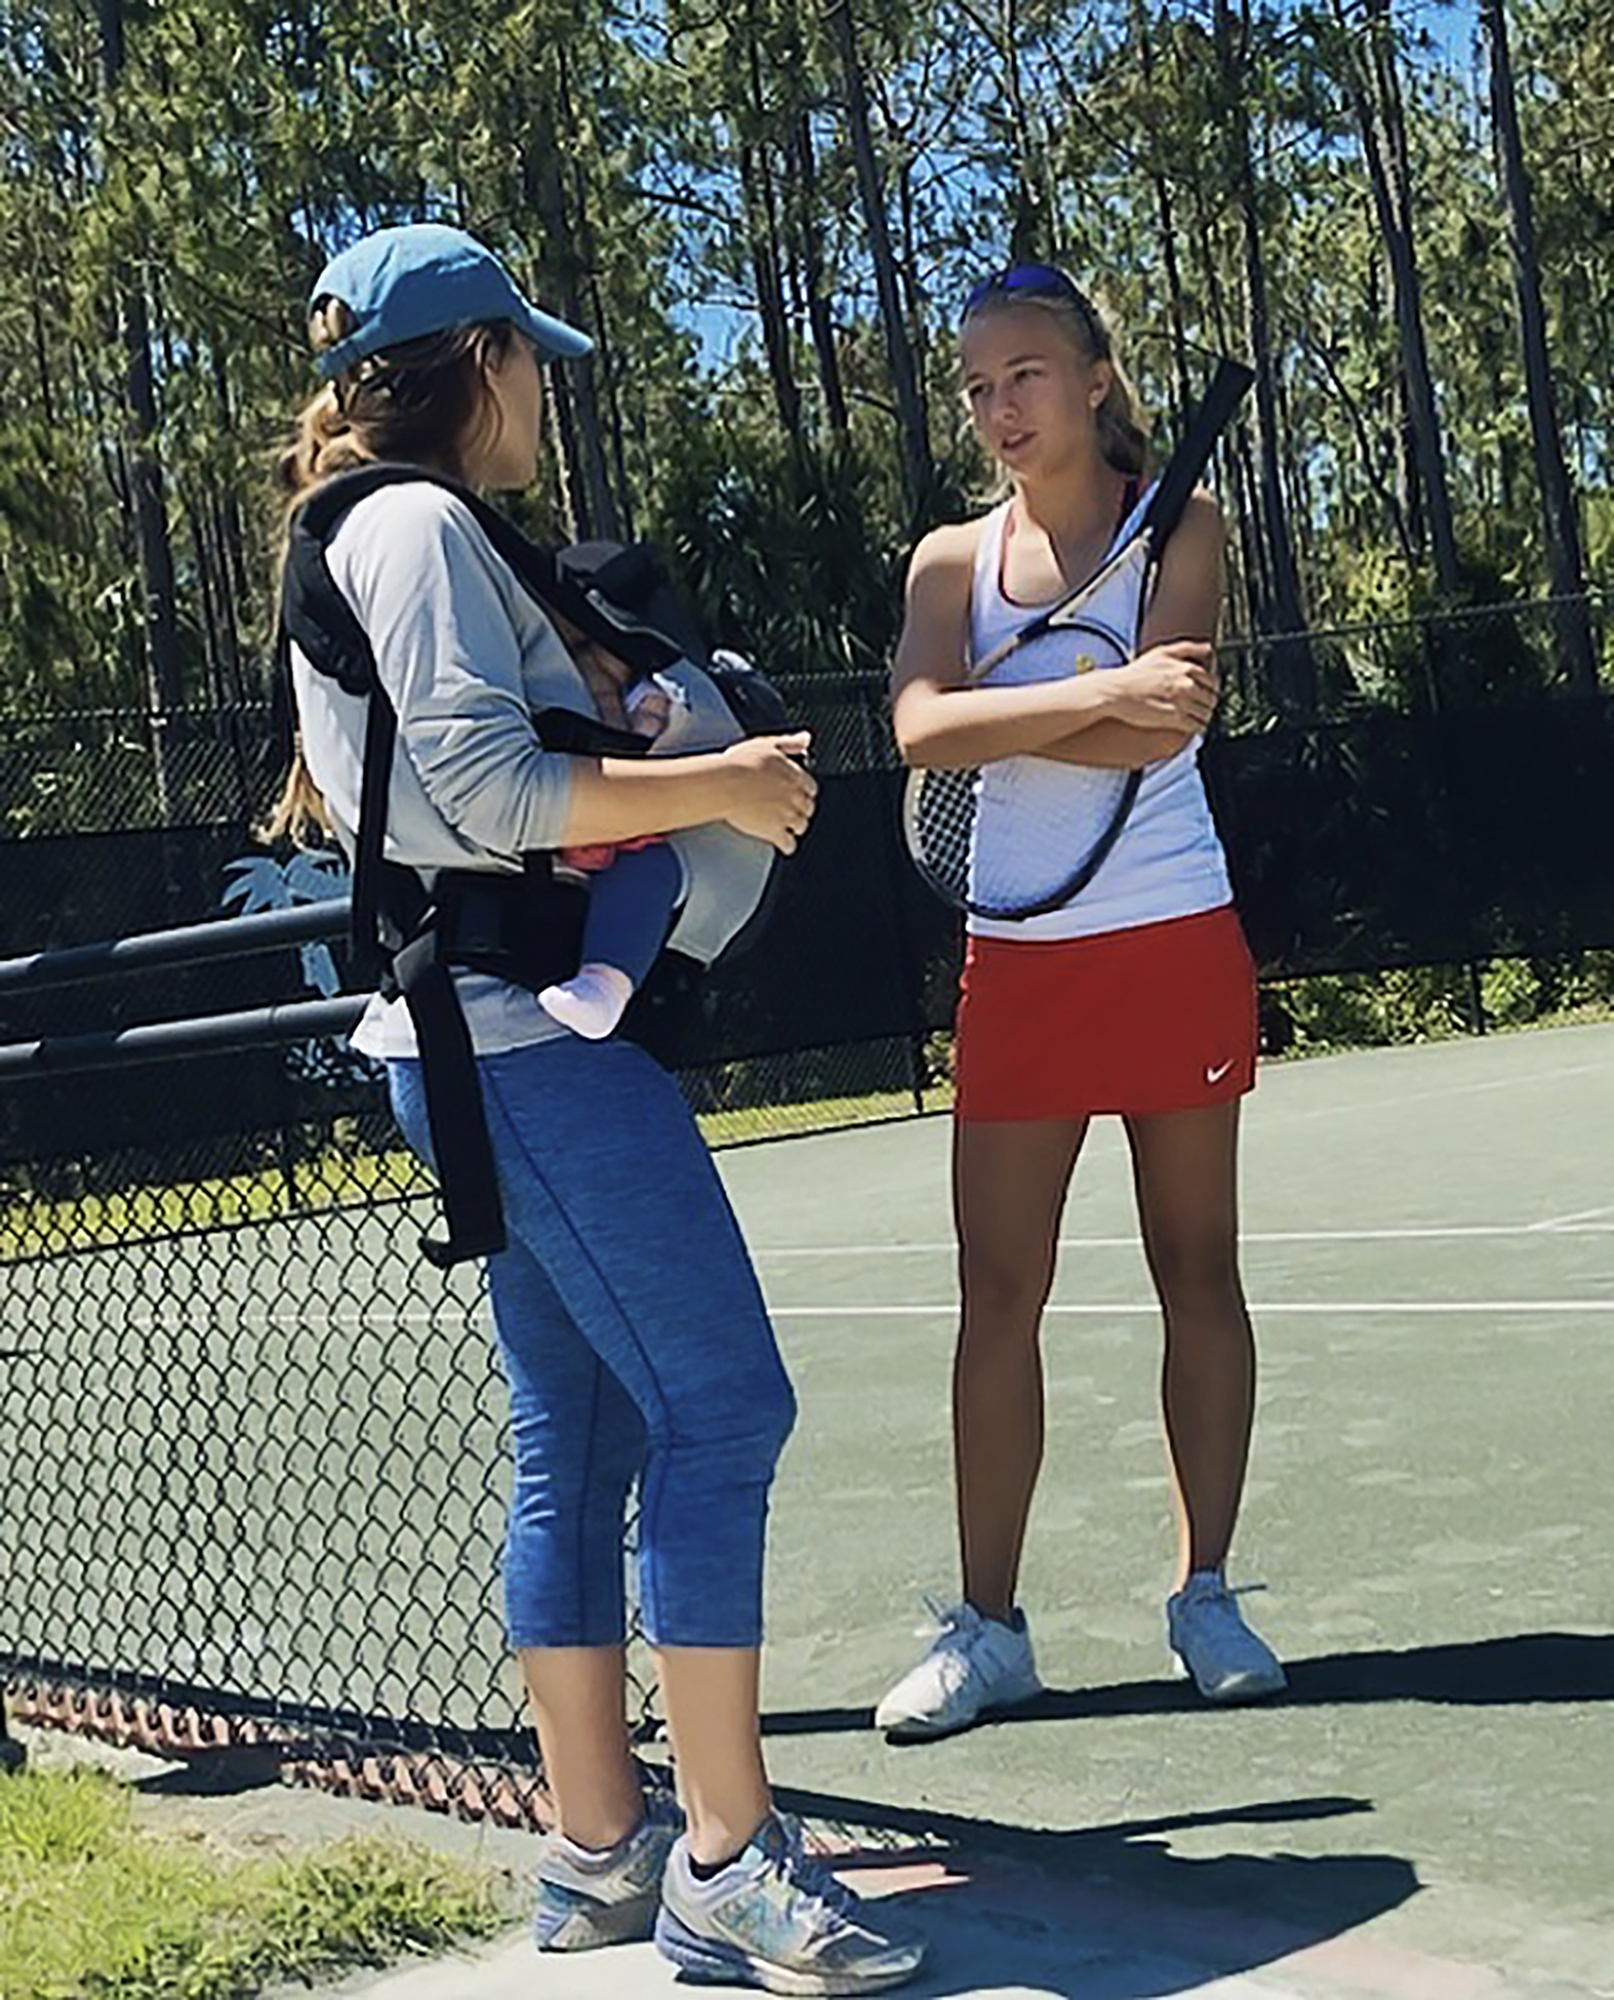 Kimberly Collins discusses strategy with her then tennis coach Jacklyn Gion. Courtesy photo Jacklyn Gion.